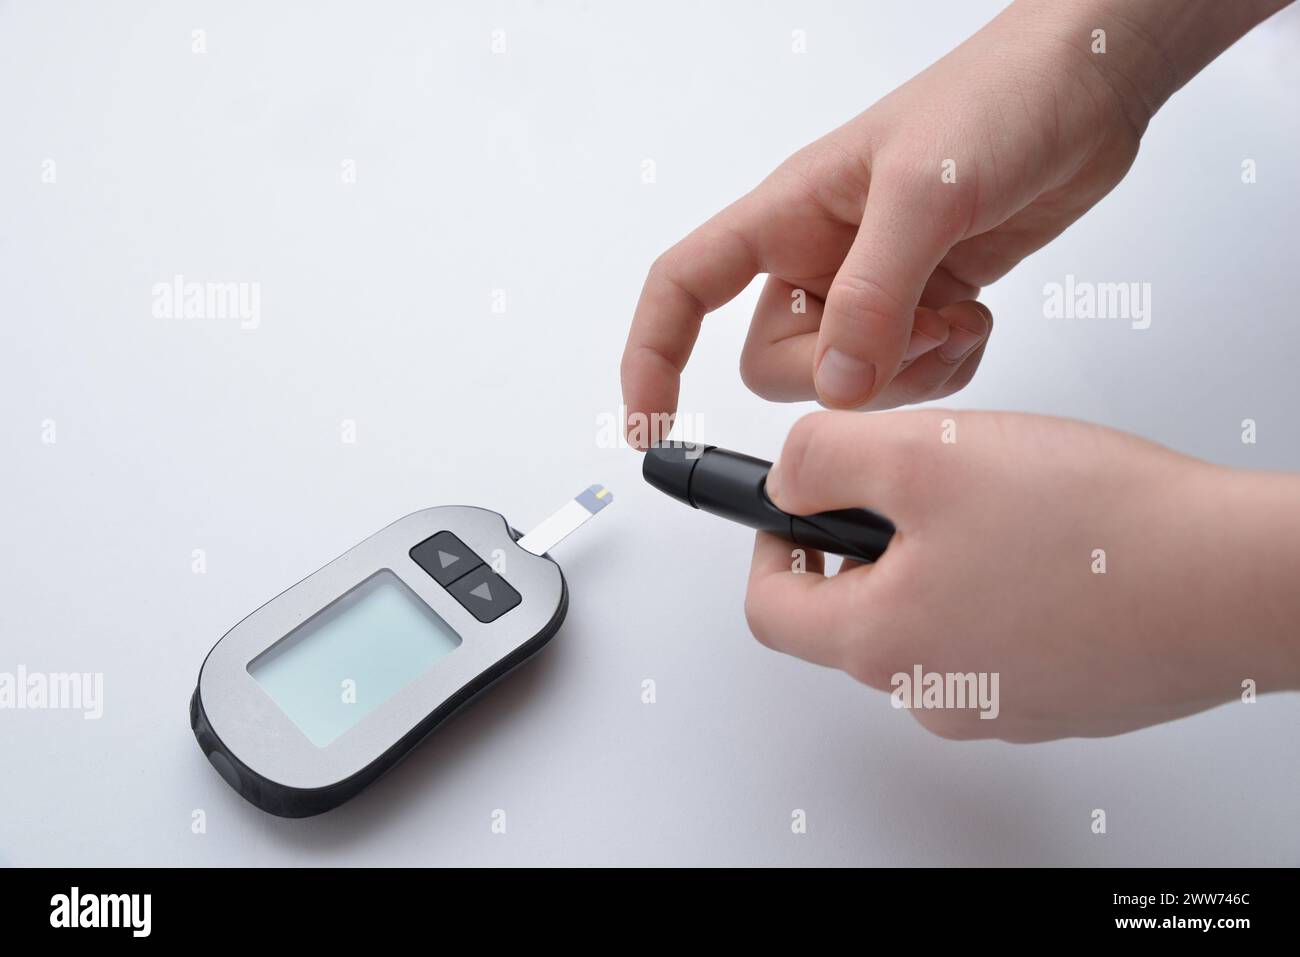 Pricking finger to measure blood sugar level using devices and strips. Highlighting the importance of diabetes management, health monitoring, and medi Stock Photo